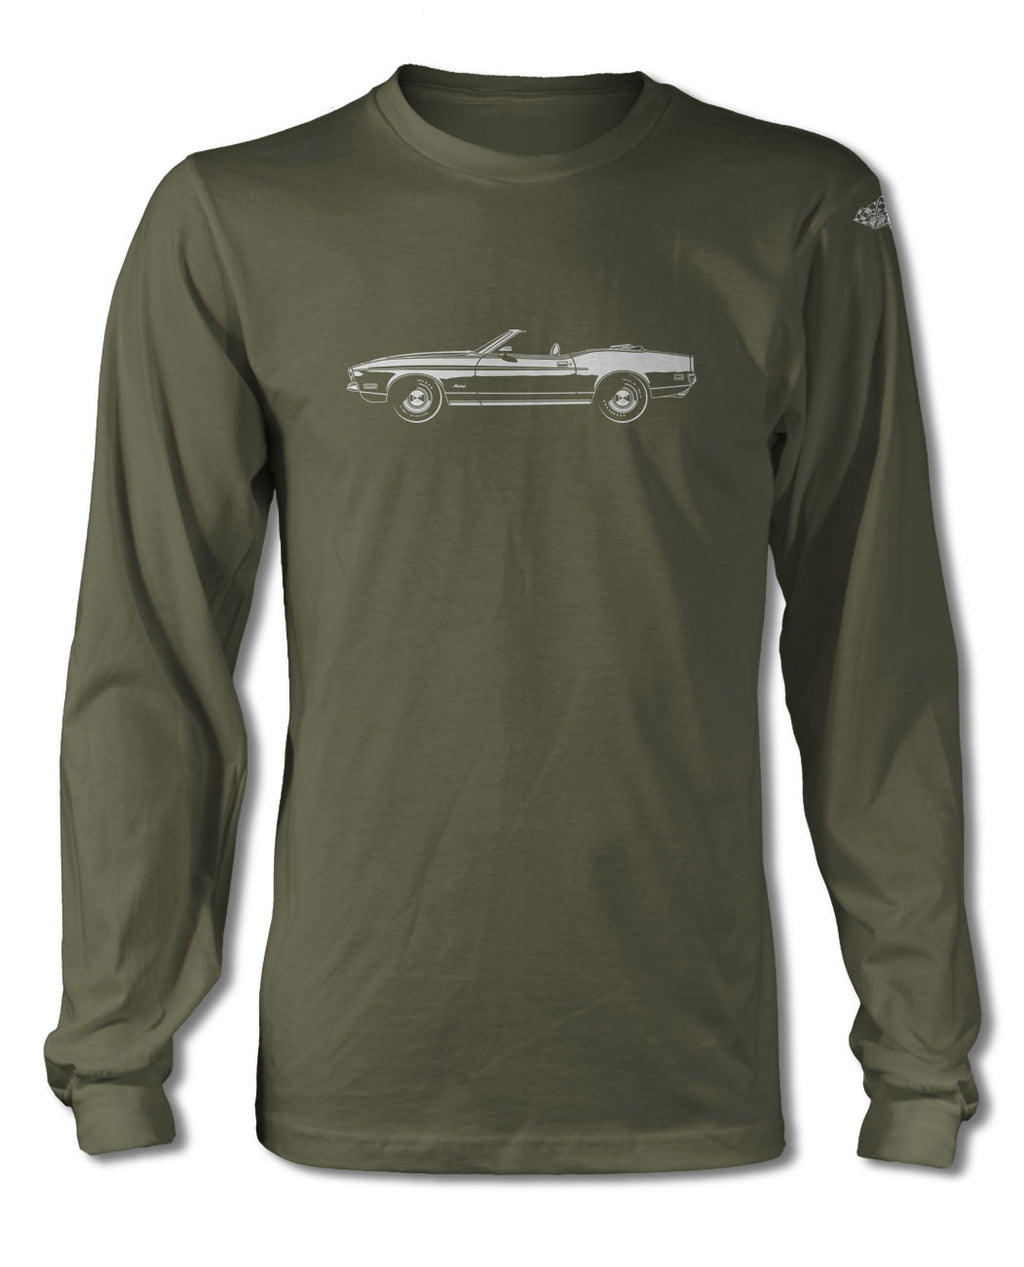 1972 Ford Mustang Sports Convertible T-Shirt - Long Sleeves - Side View